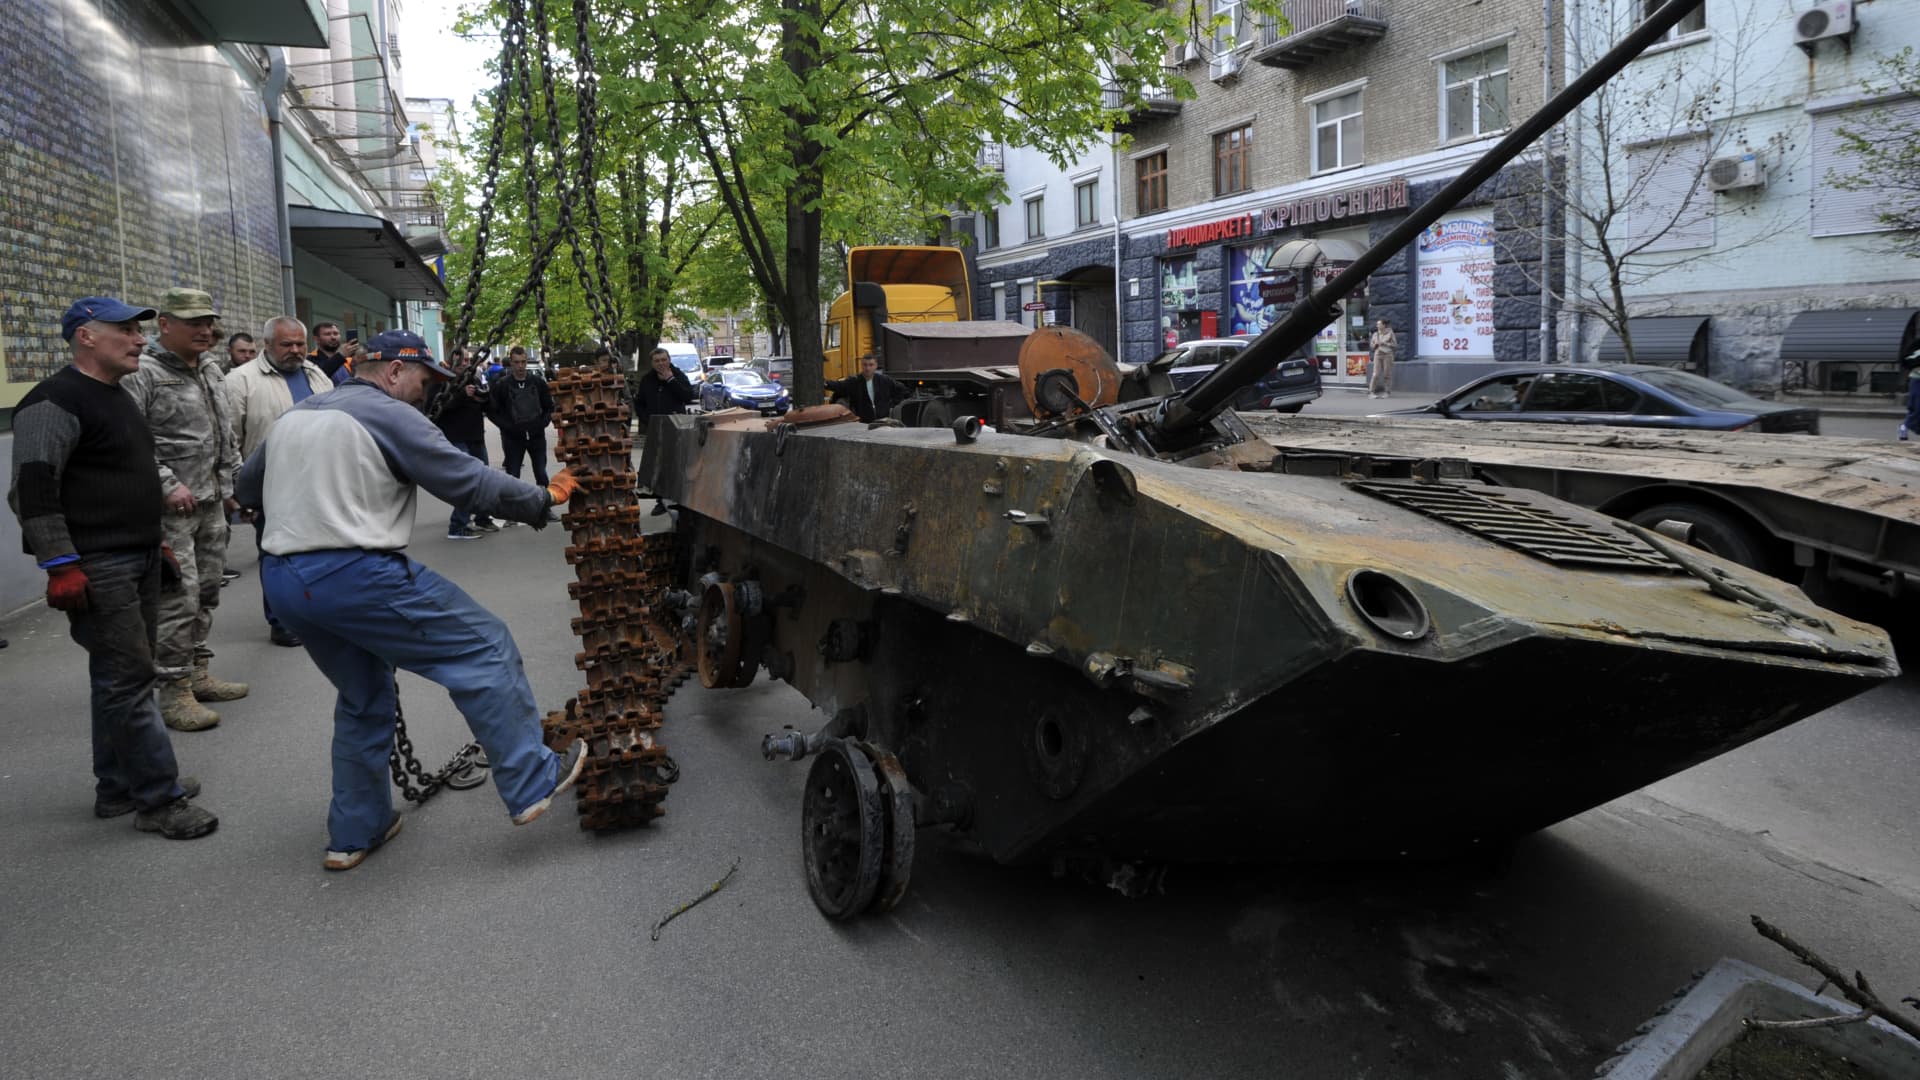 Workers install a destroyed Russian BMD-2 (Airborne Fighting Vehicle) near the military museum in Kyiv to showcase to passersby. It was destroyed by the Ukrainian military in the Kiyv region then brought into Kyiv for display. 